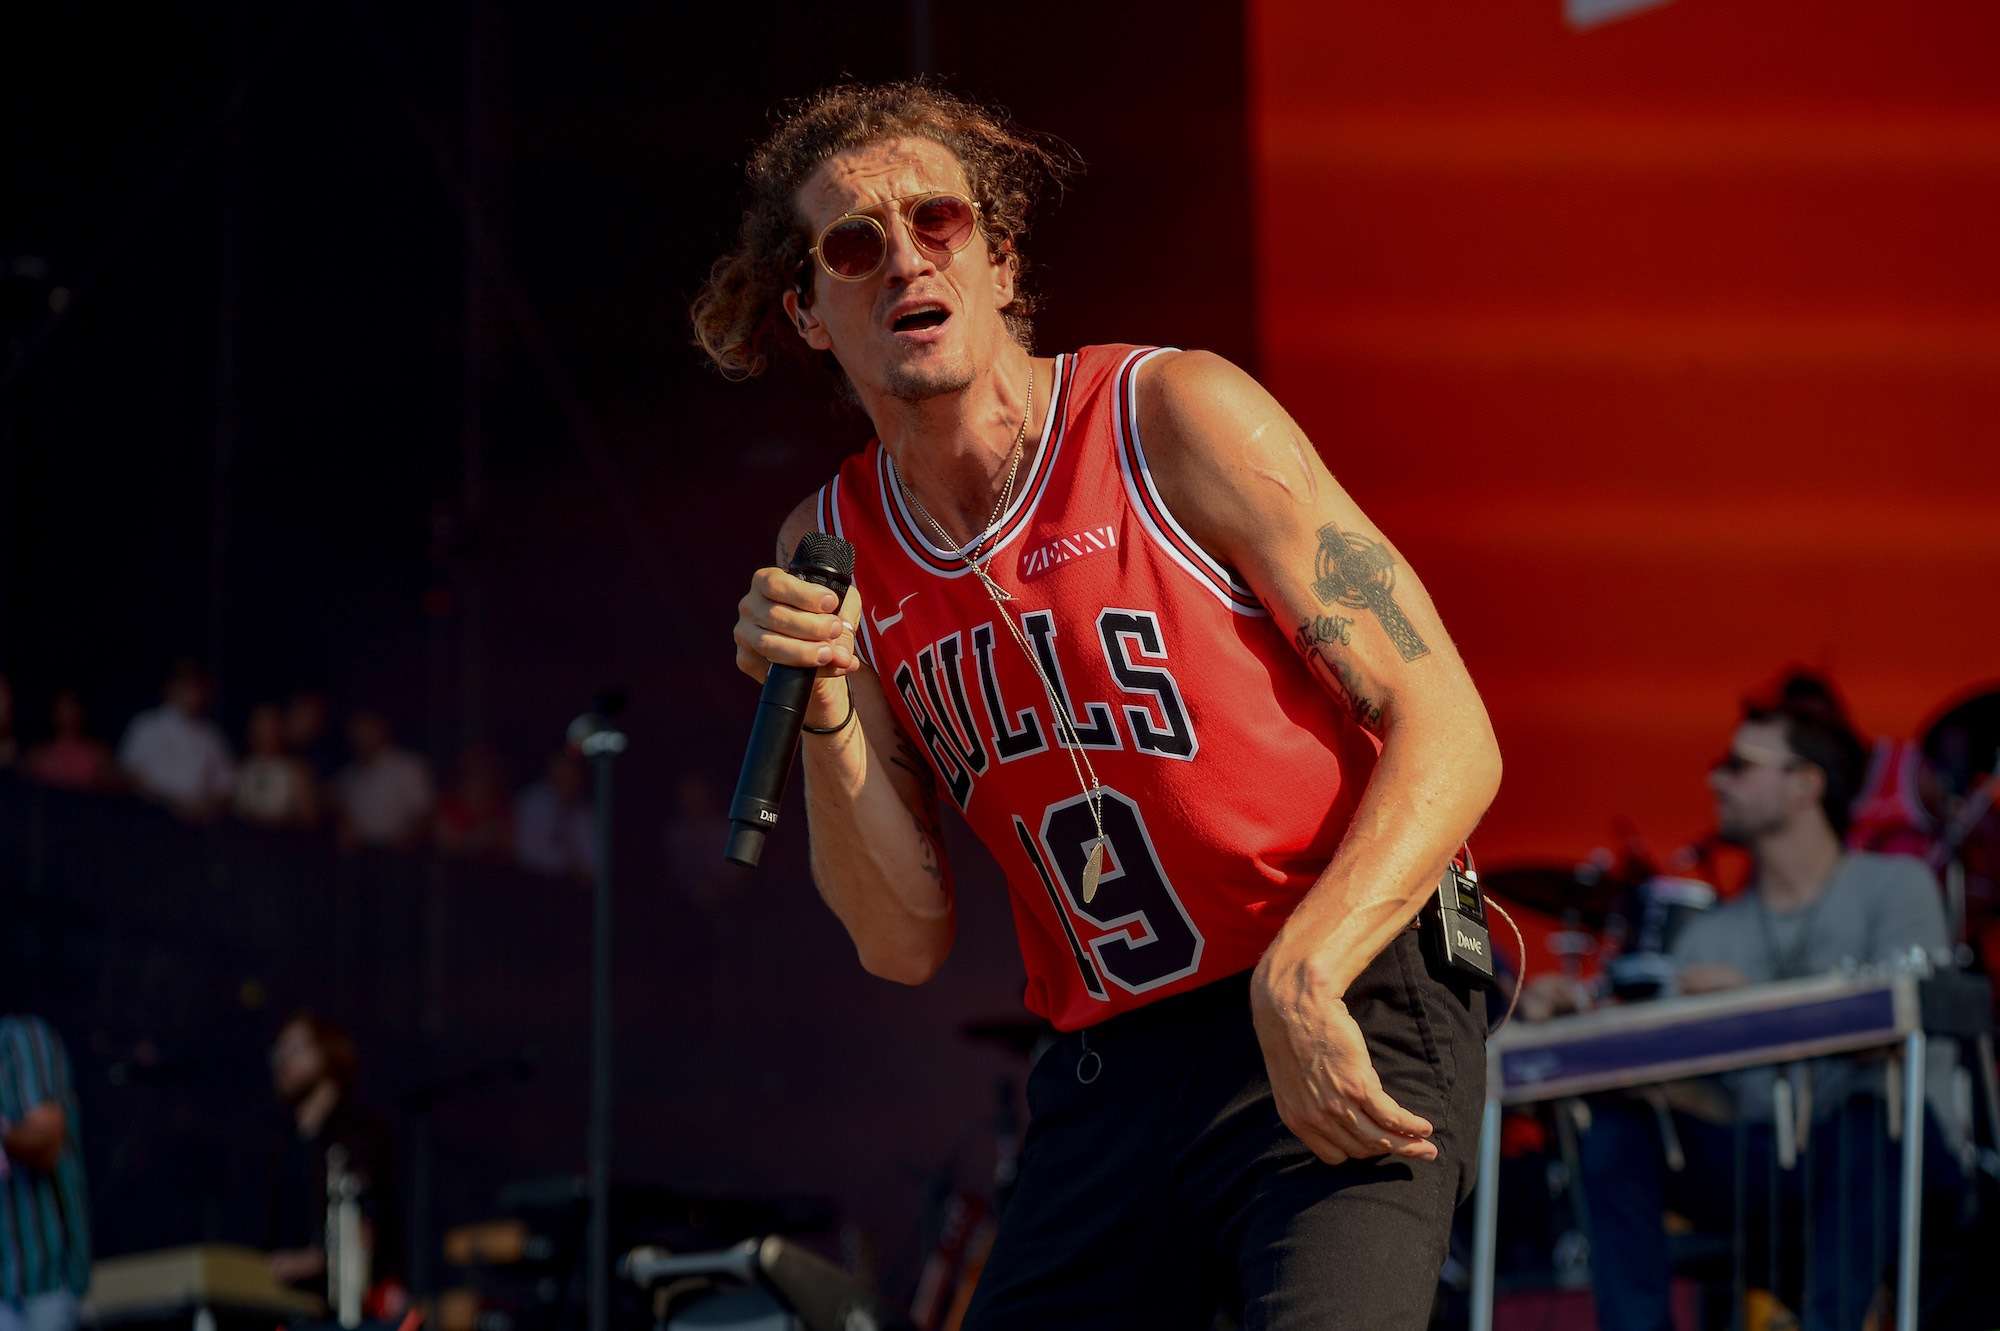 The Revivalists Live at Lollapalooza [GALLERY] 9